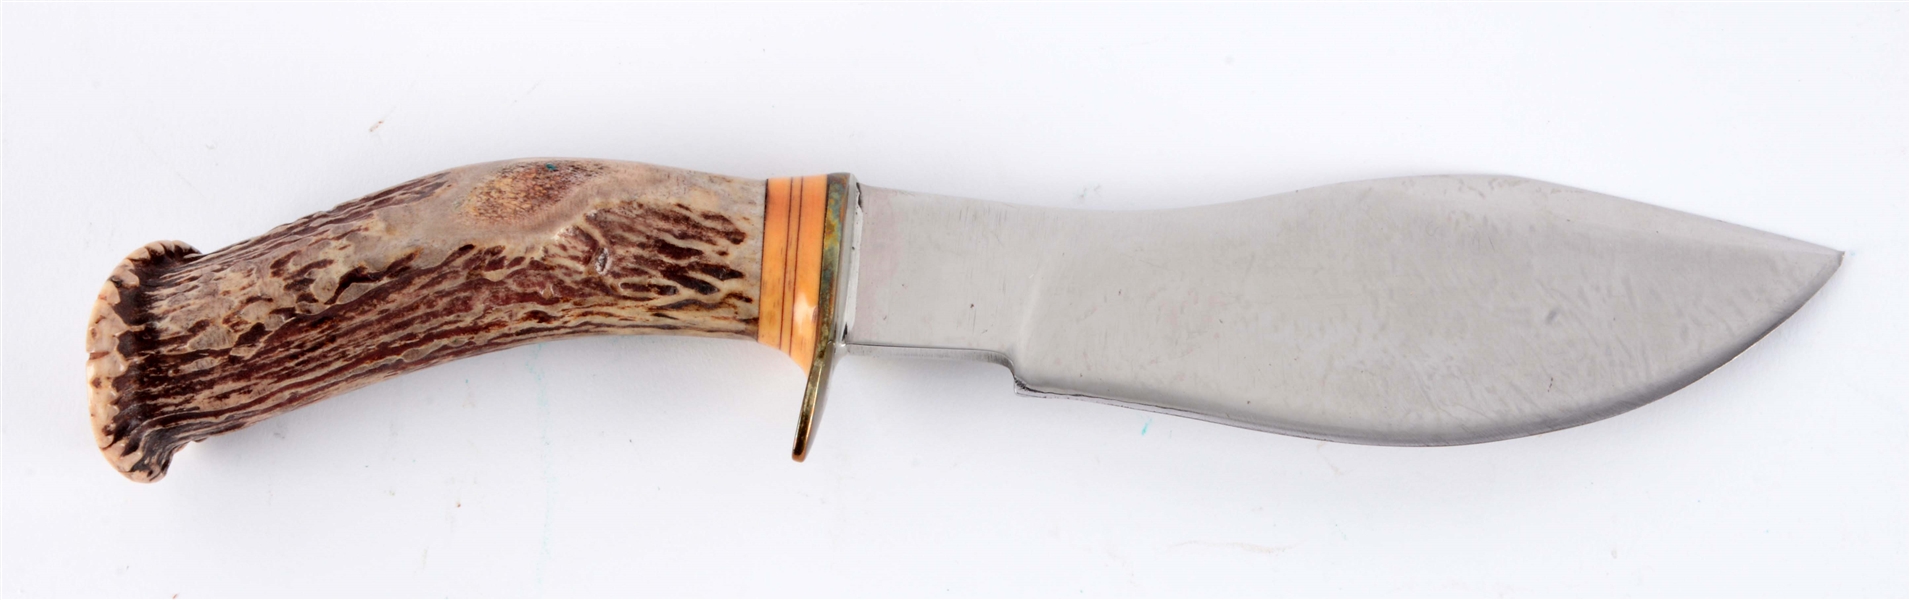 J.N. COOPER KNIFE WITH STAG HANDLE.